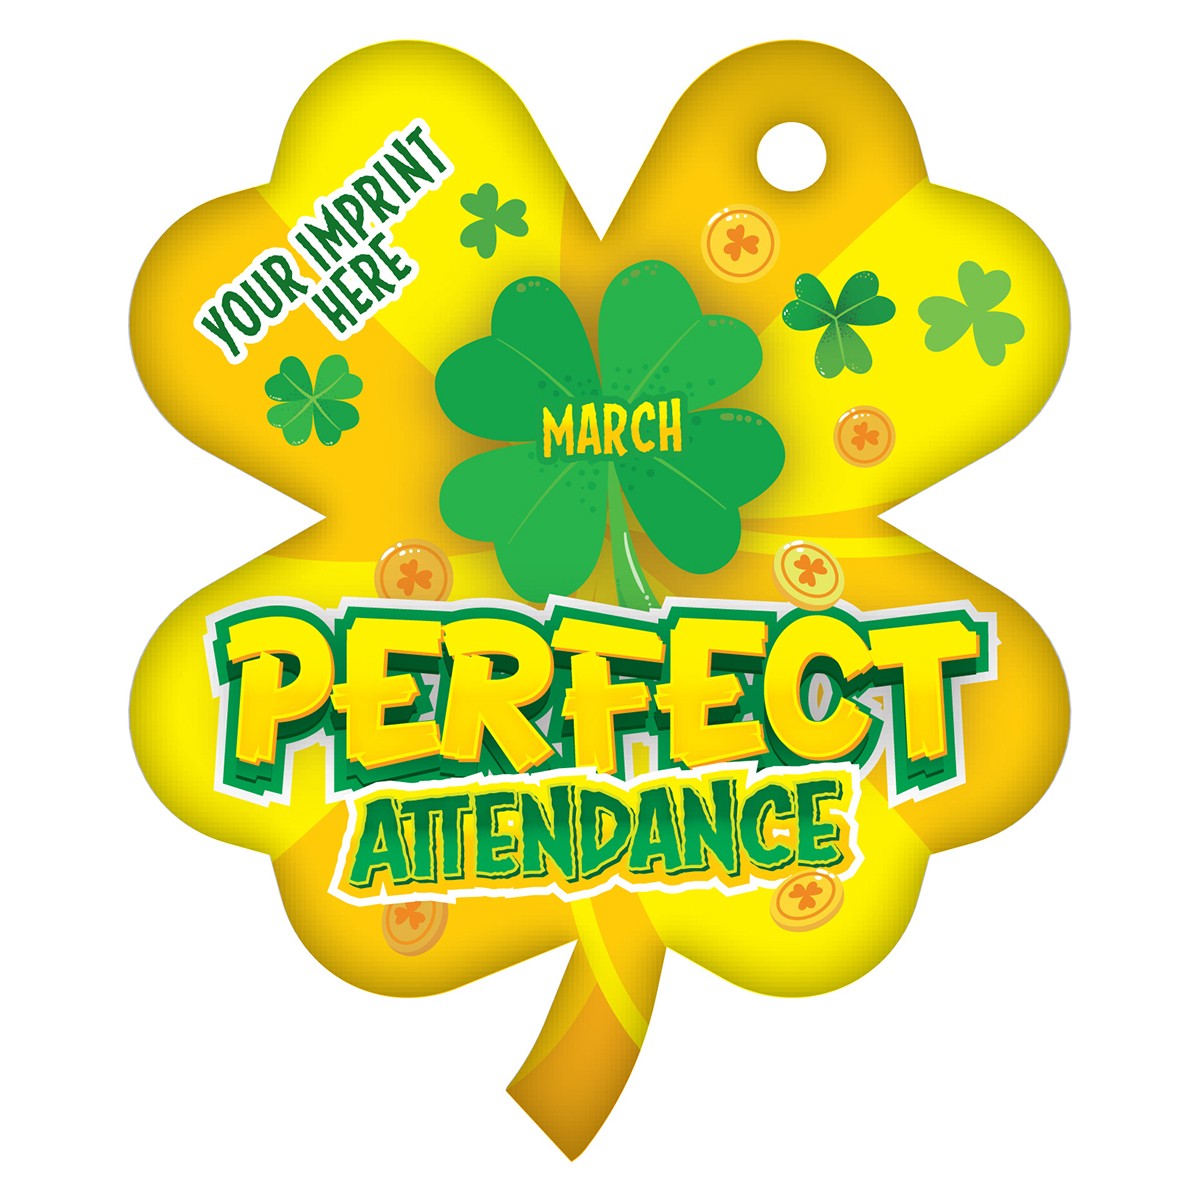 Attendance clipart perfect attendance. Holiday march 